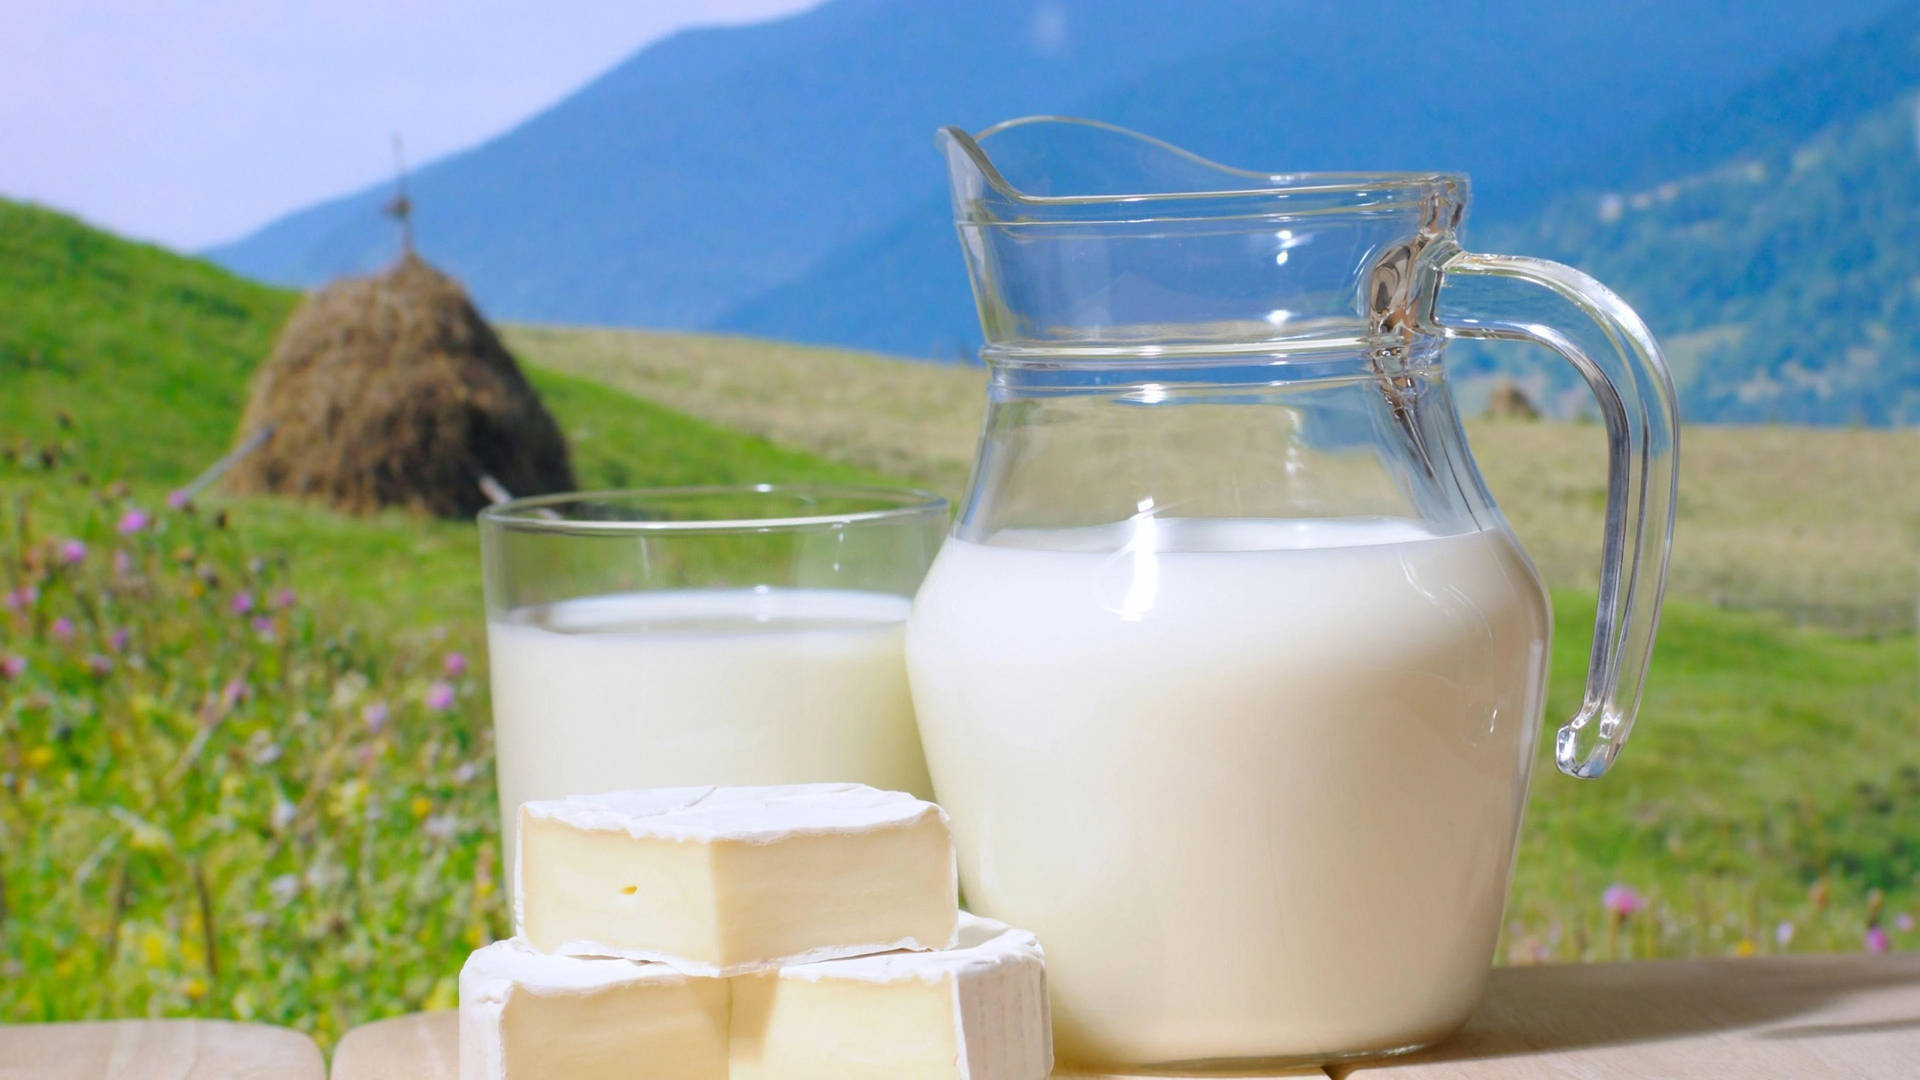 Milk And Cheese At A Pasture Background